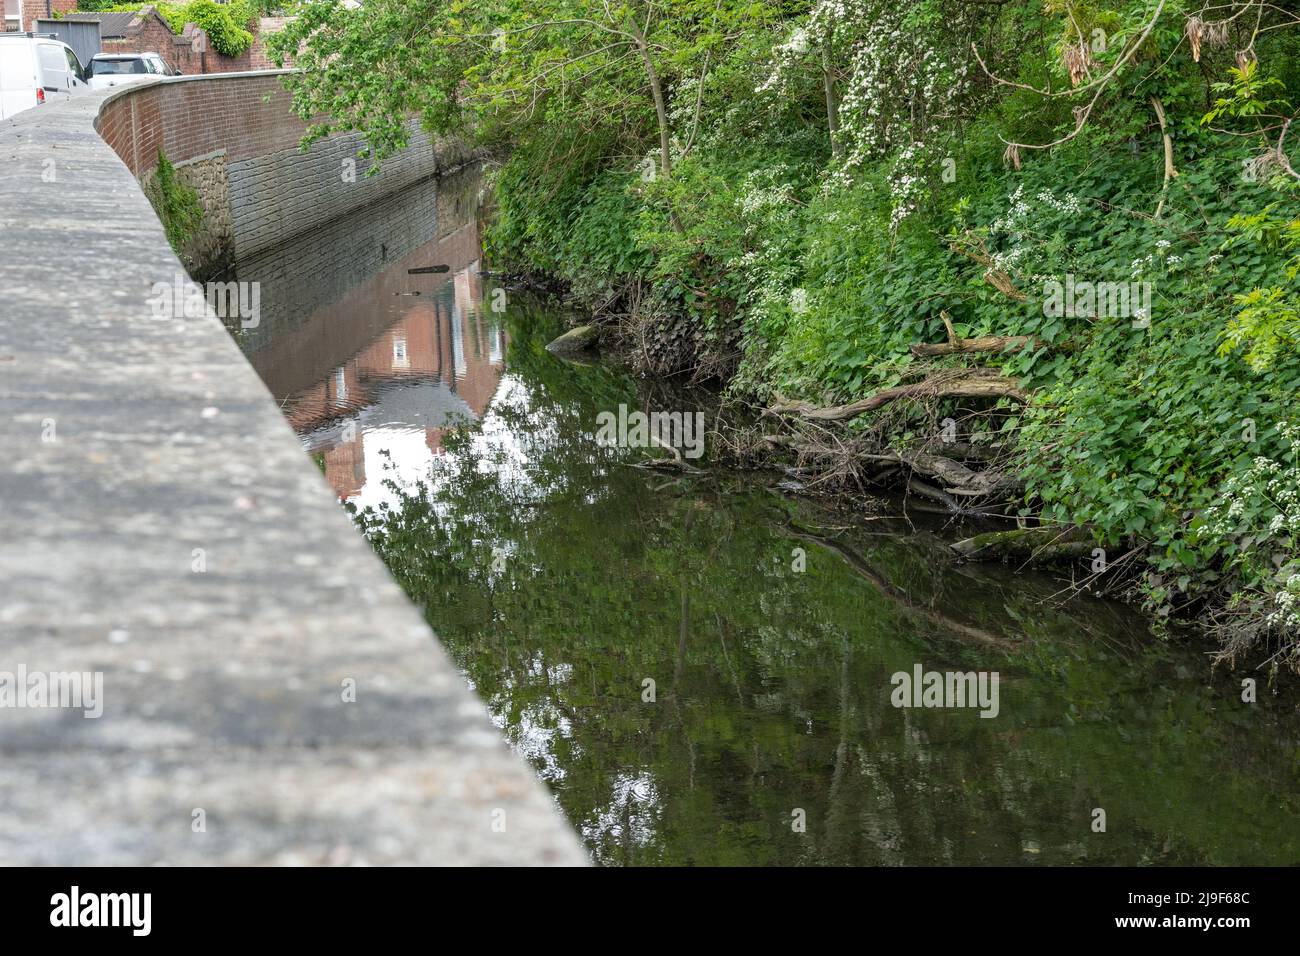 Flood defences on the river Ouseburn. Newcastle upon Tyne, UK. protecting nearby houses and roads. Stock Photo